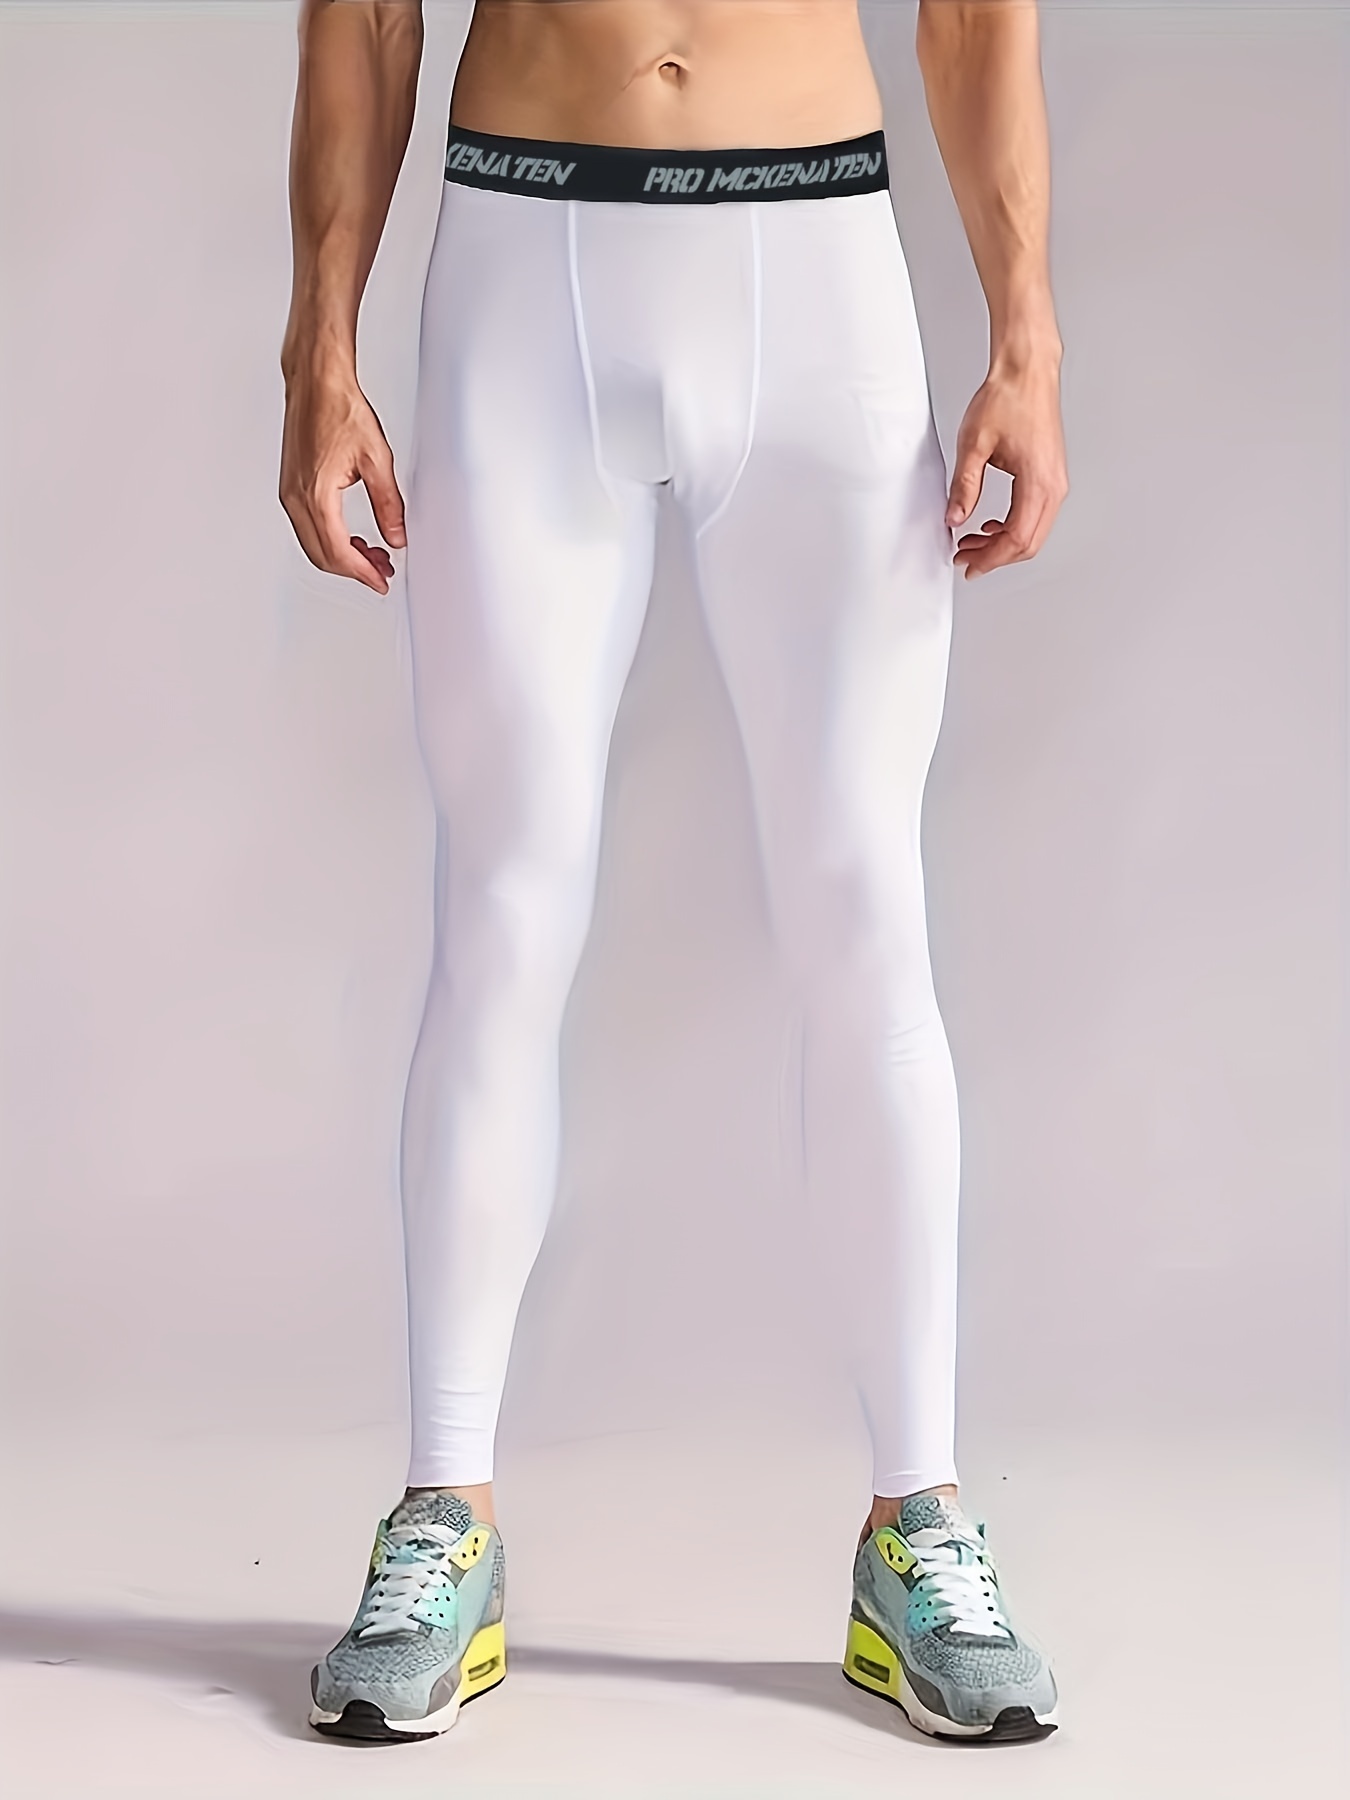 Mens Compression Pants For Sports, Running, Basketball, Gym